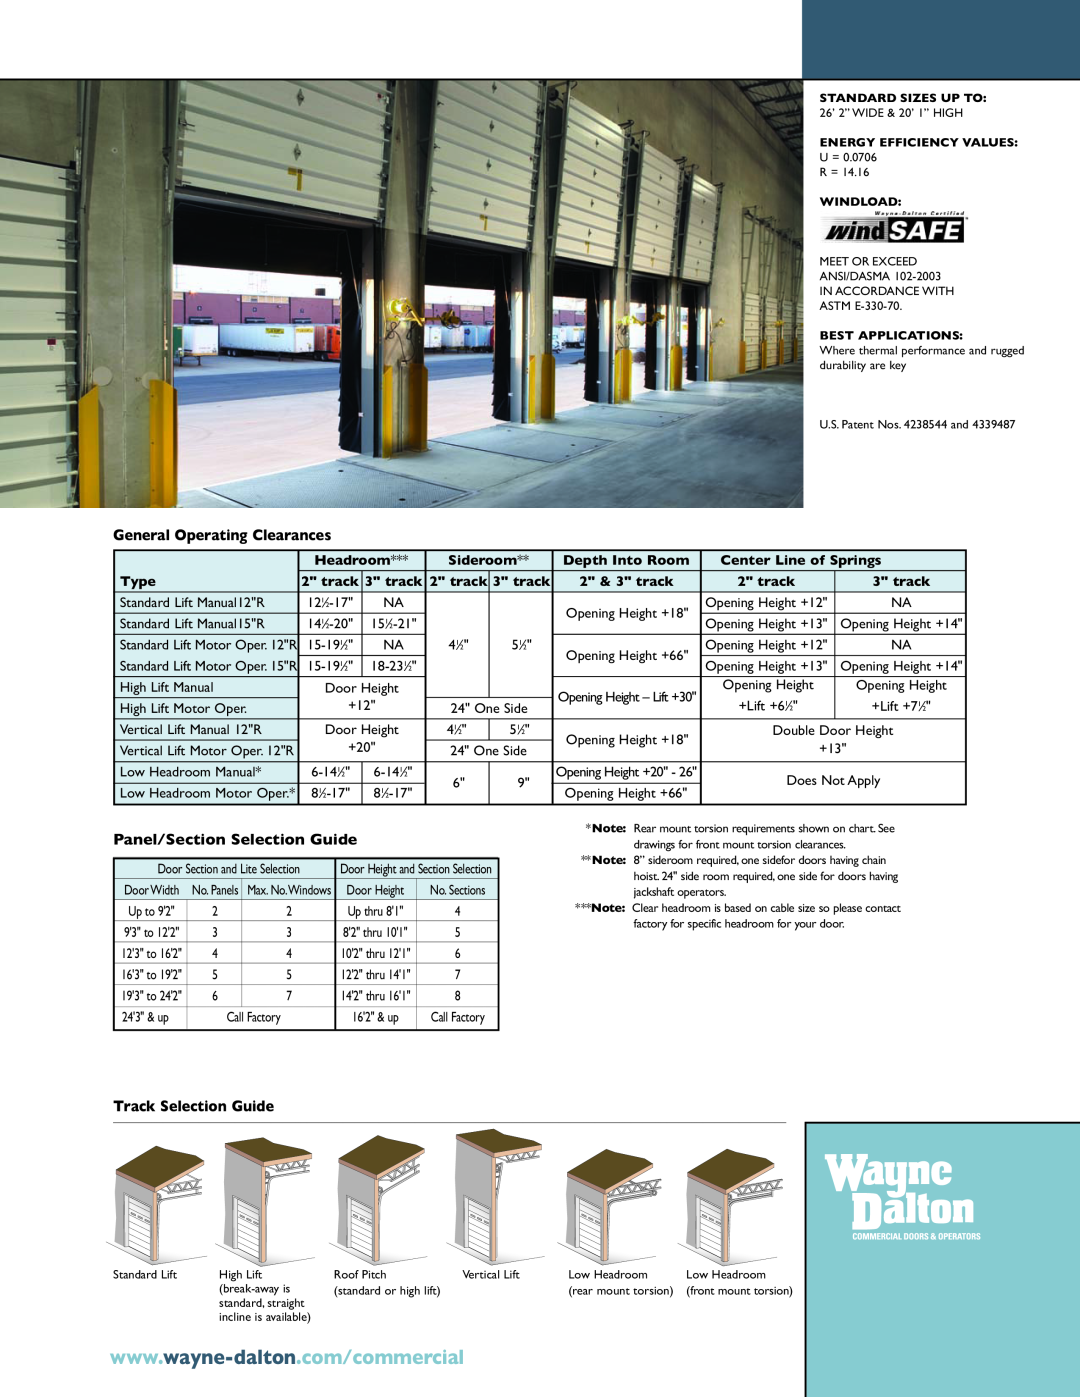 Wayne-Dalton 150 manual General Operating Clearances, Panel/Section Selection Guide, Track Selection Guide 